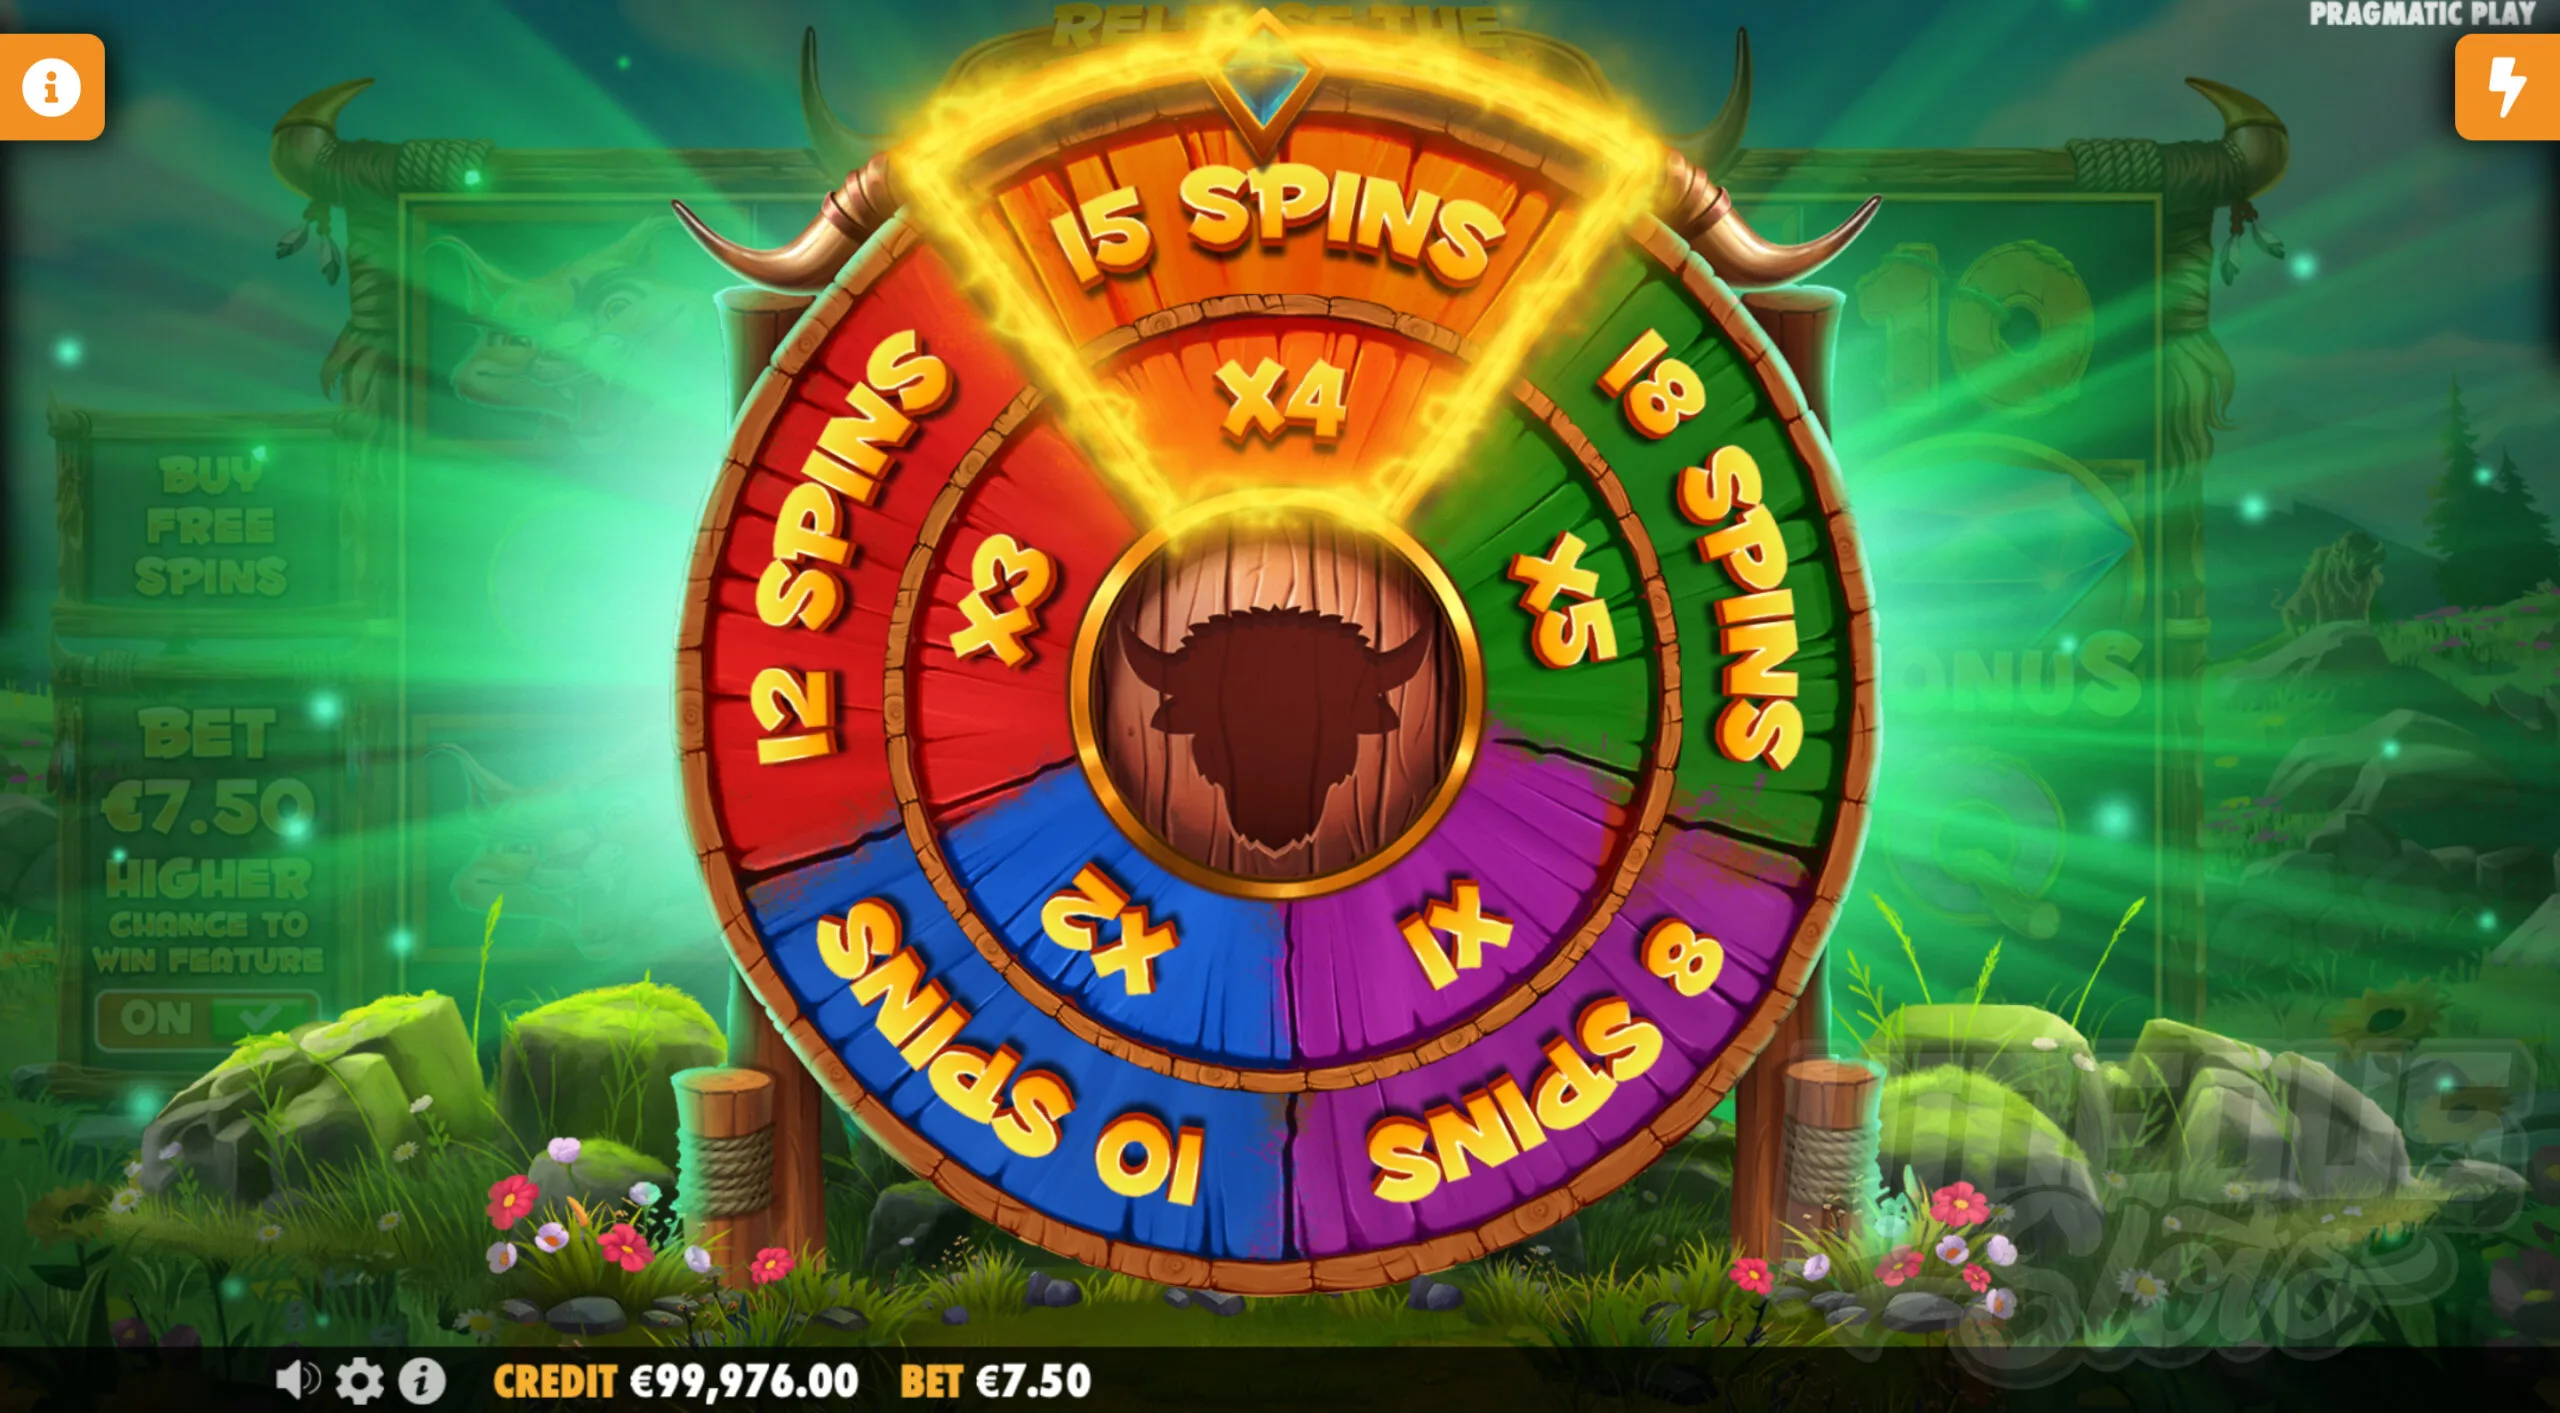 Before Free Spins Begin Players Spin a Wheel to Determine the Number of Spins Awarded and the Win Multiplier